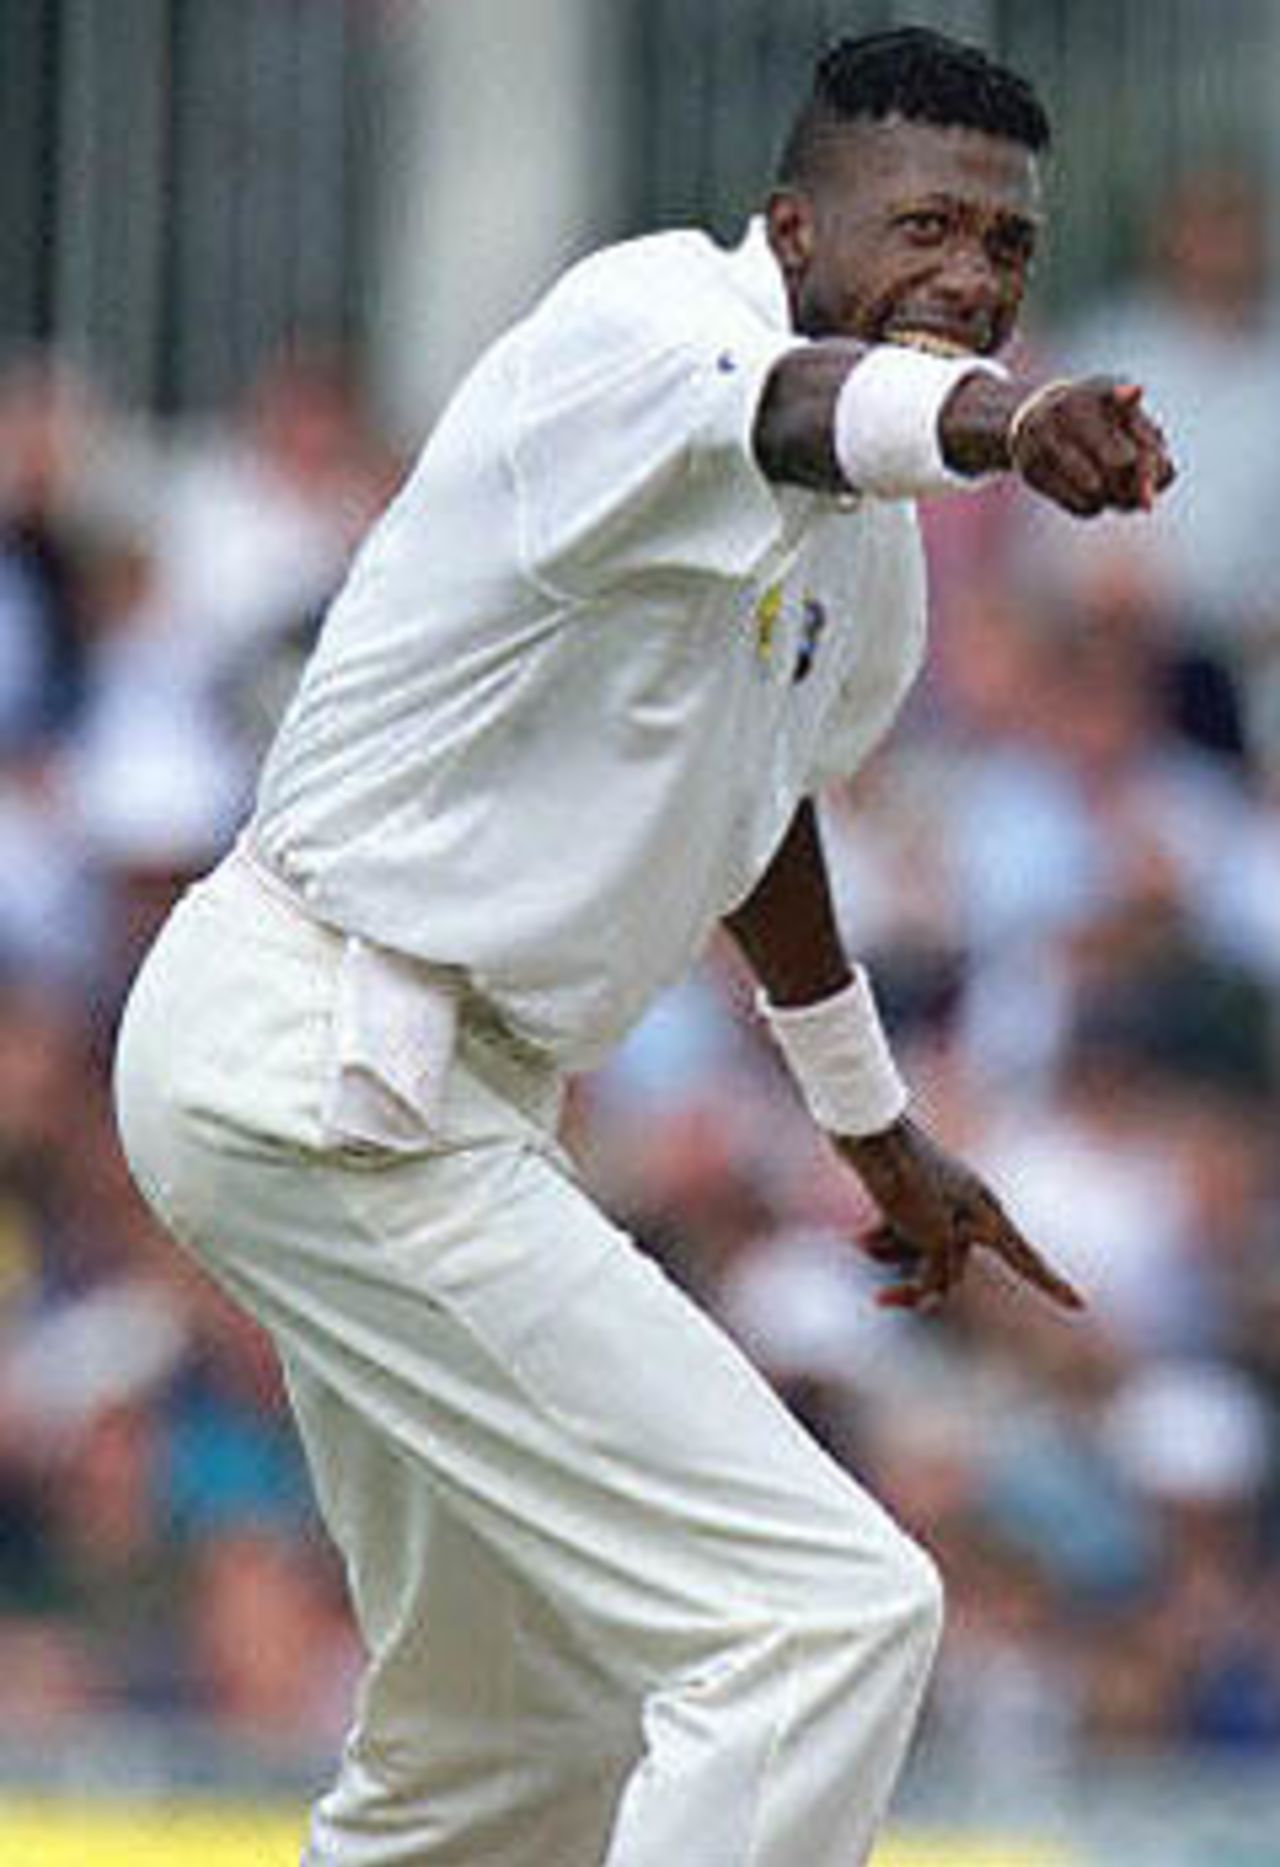 Curtly Ambrose, of the West Indies, celebrates after taking the wicket of Graeme Hick during the second day of the Fifth Test against England at the Oval in London. Ambrose took two wickets for 37 runs in his first 31 overs. Rain has since stopped play with England 256 for eight. The Wisden Trophy, 2000, 5th Test, England v West Indies, Kennington Oval, London, 31Aug-04Sep 2000 (Day 2)